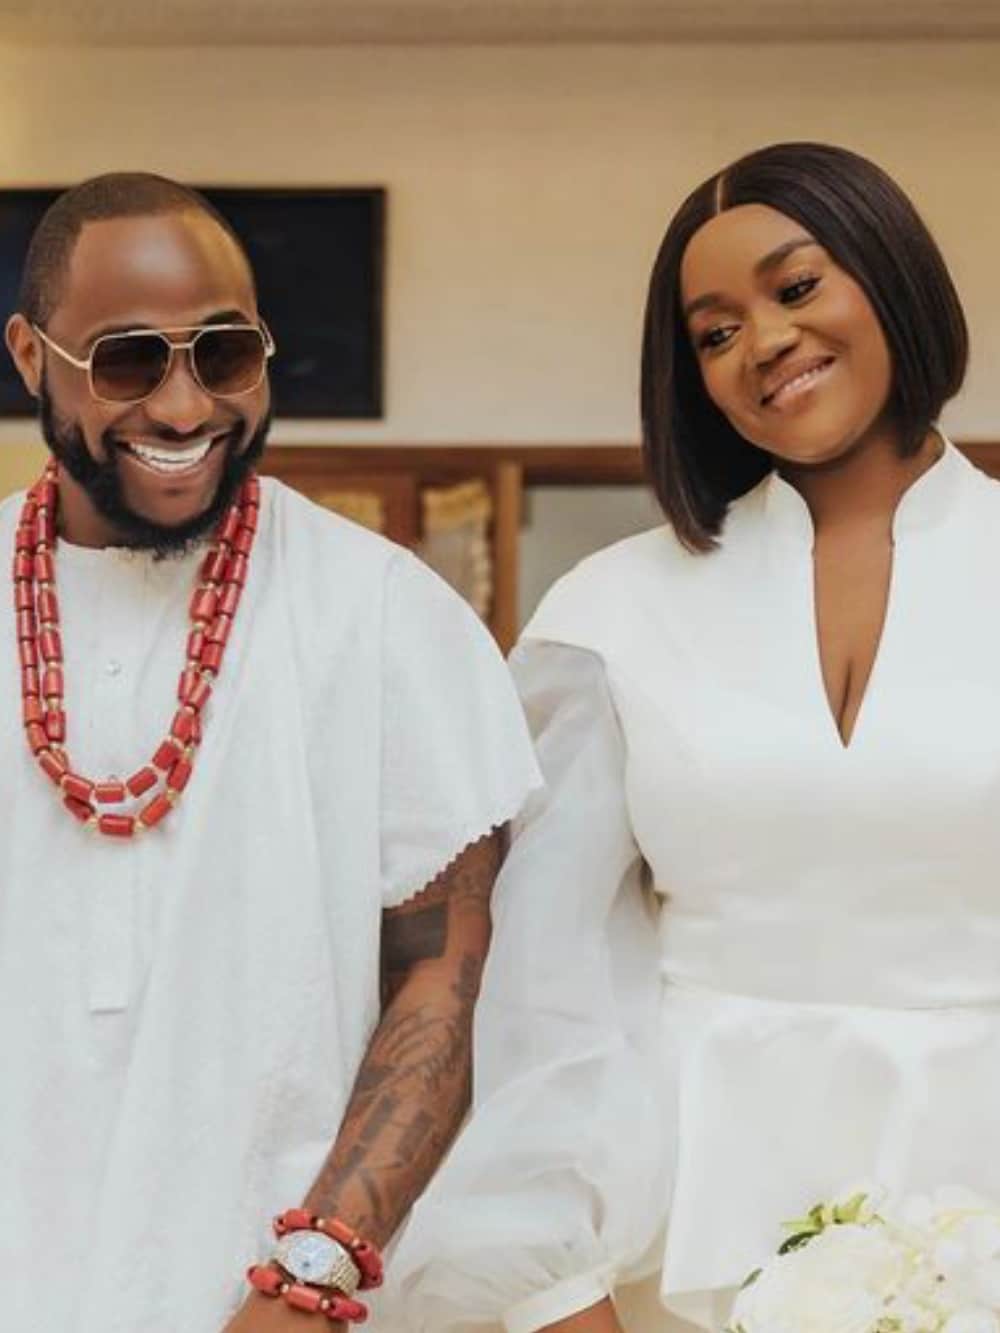 "She ignored me despite being a star" – Davido recounts first time he tried speaking to wife Chioma (Video)